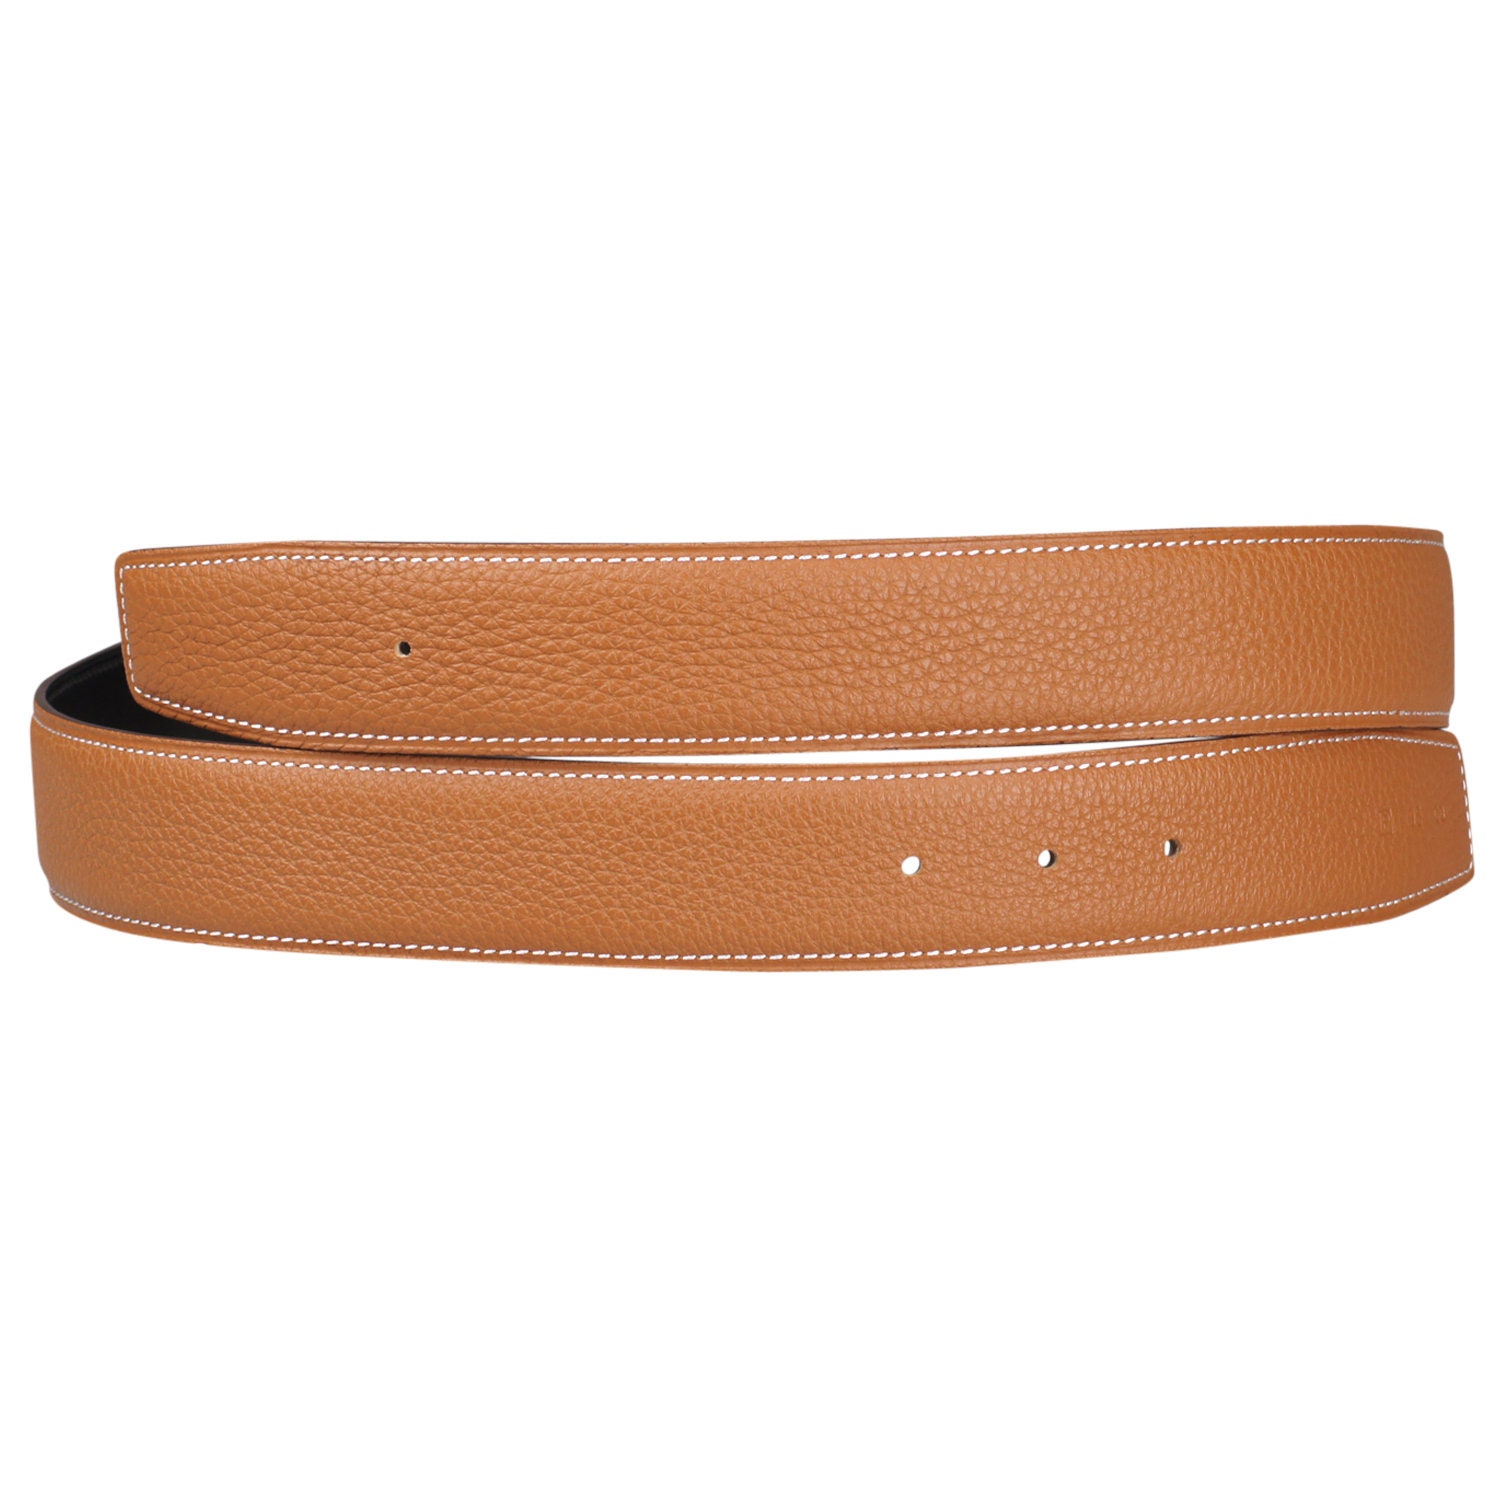 H Full Grain Leather Belt Strap Without Buckle Interchangeable - Etsy ...